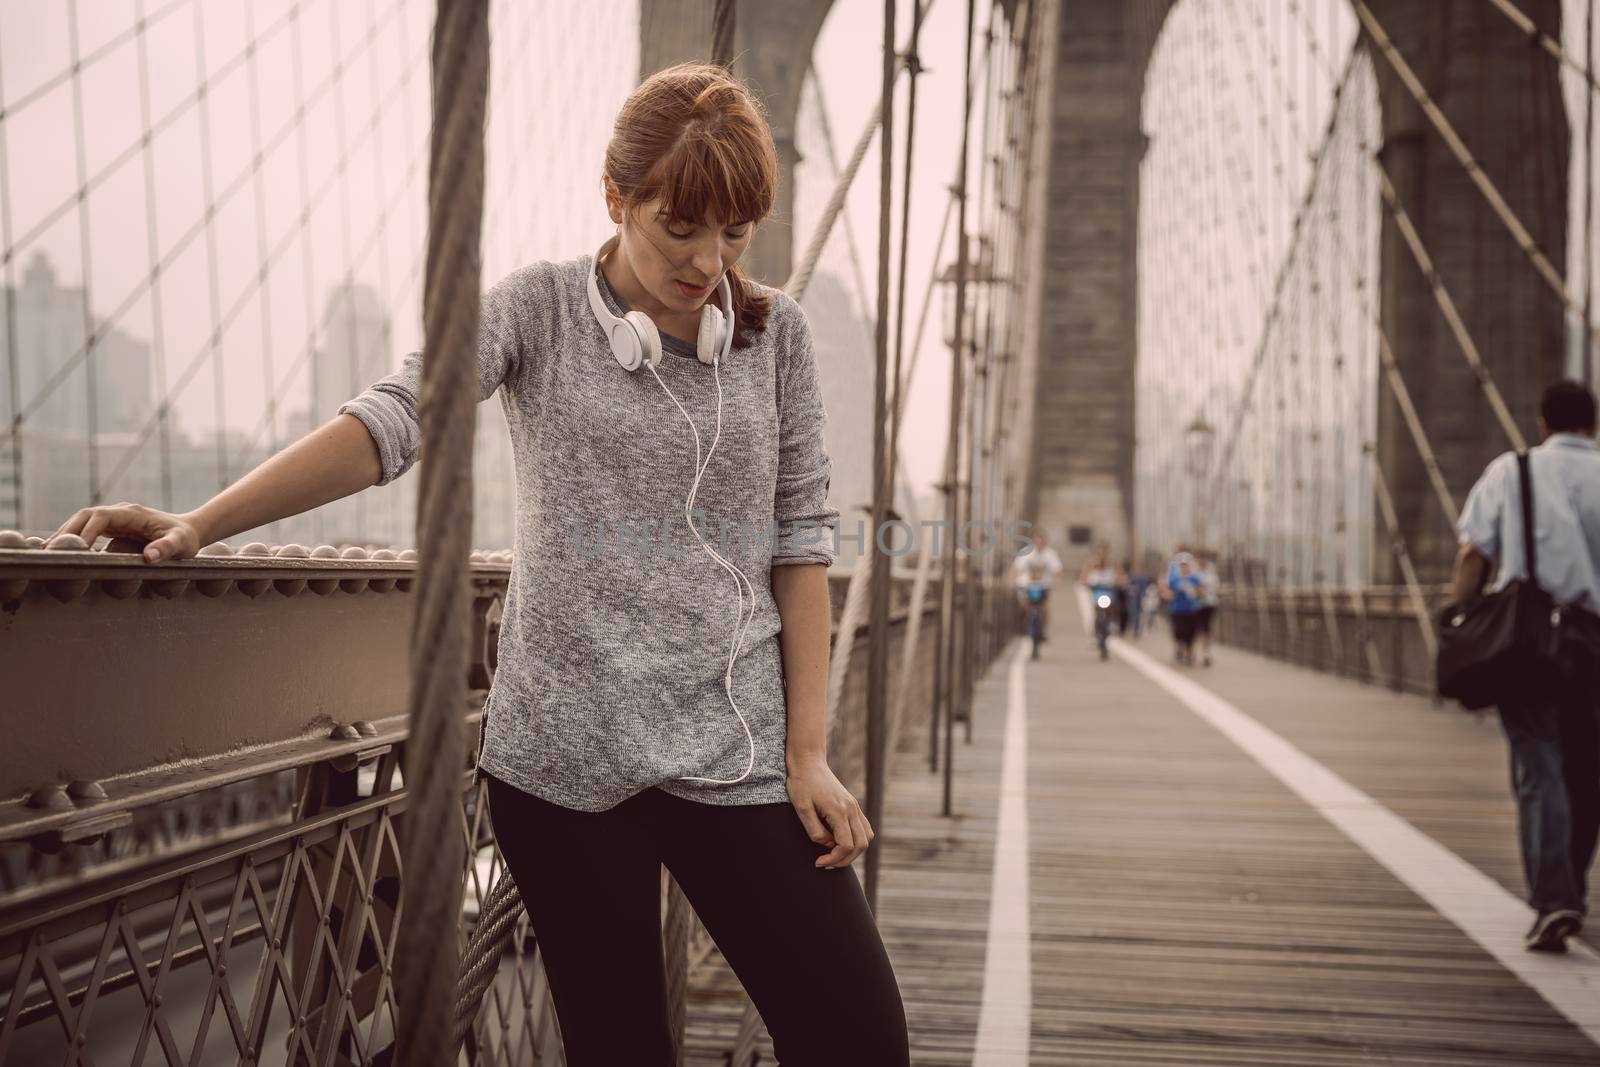 Woman on the Brooklyn bridge making a pause after the exercise